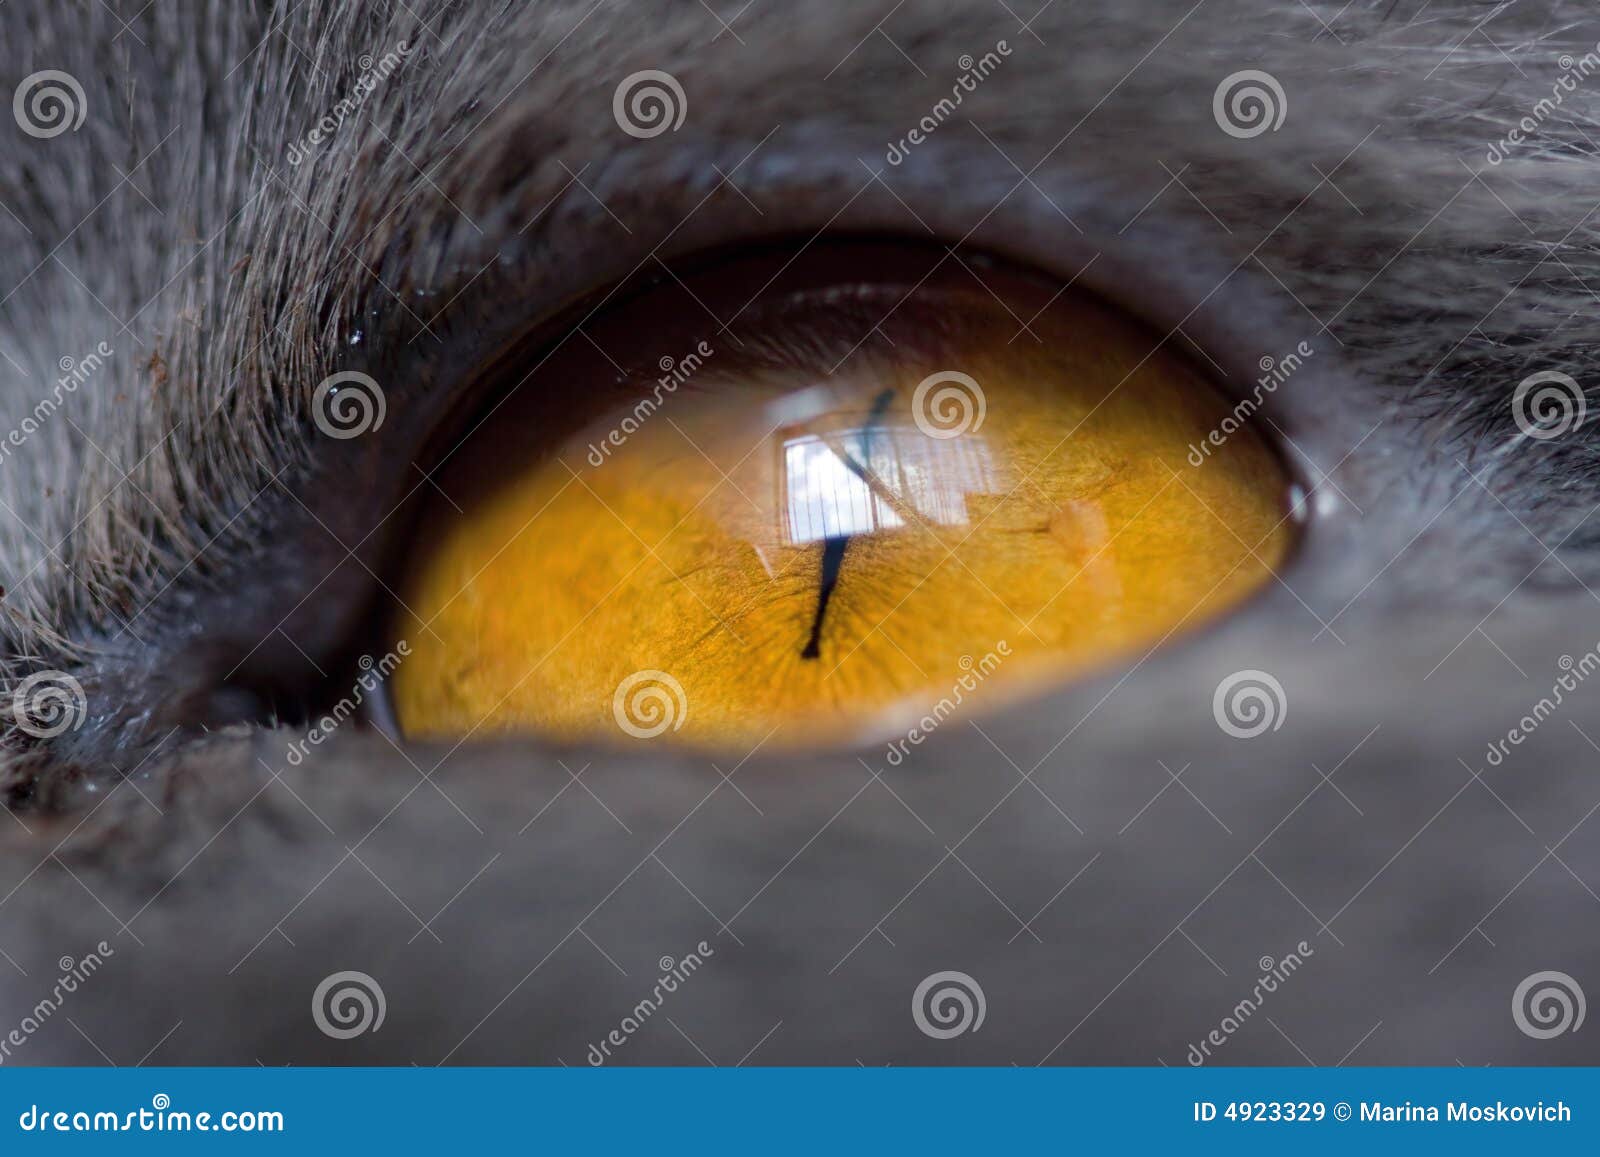 extremely close-up of cat eye